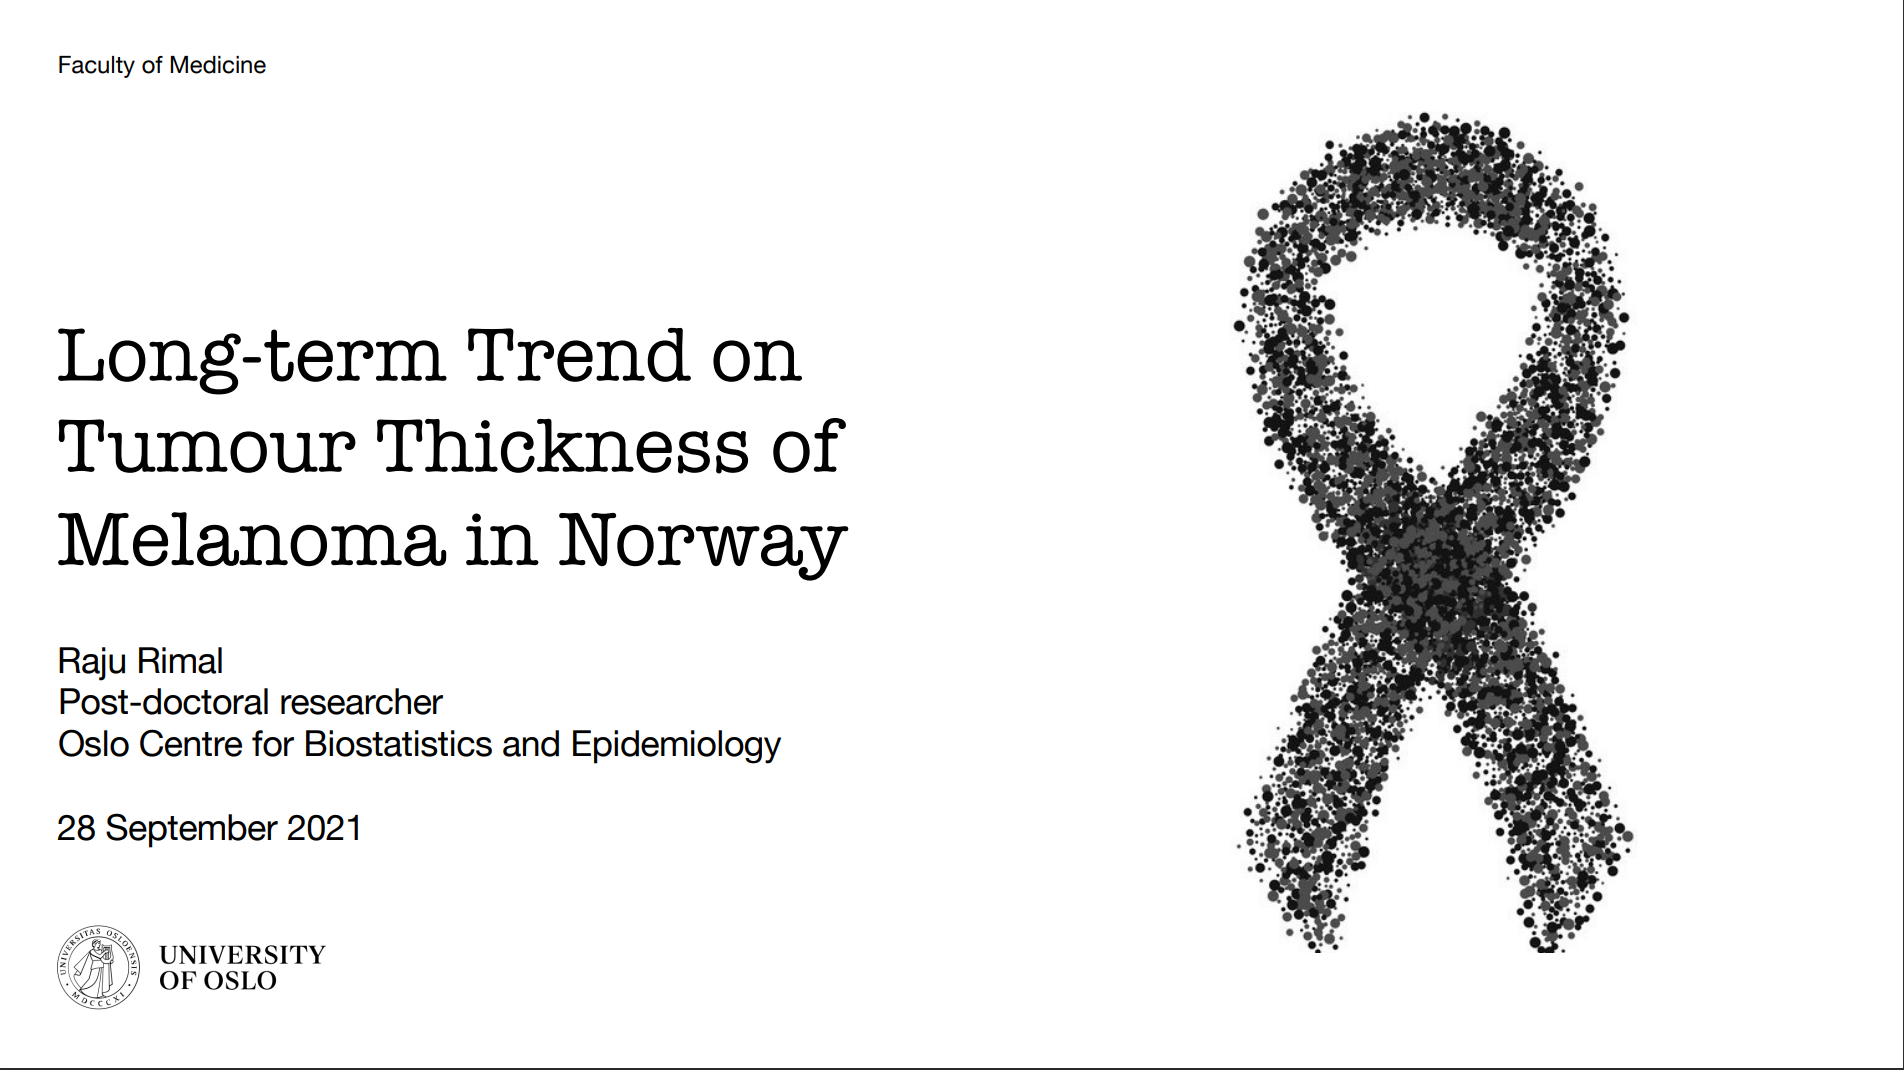 Long-term Trend on Tumour Thickness of Melanoma in Norway